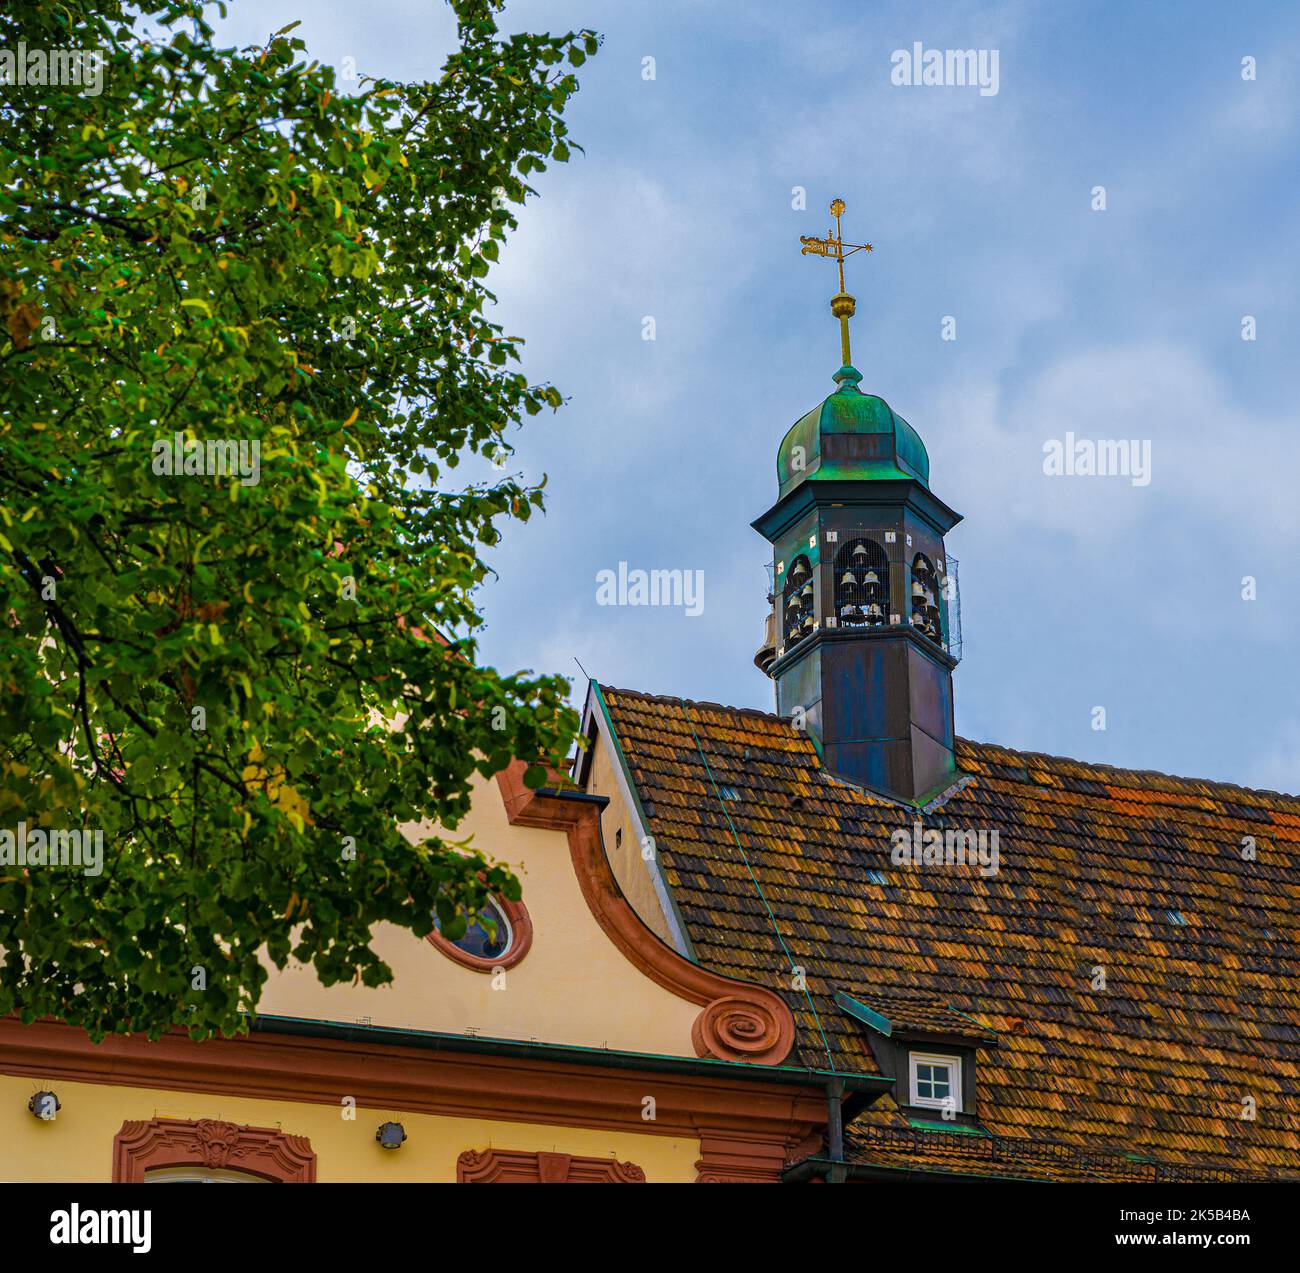 The glockenspiel (chimes) on the roof turret of the town hall extension in Offenburg. Baden Wuerttemberg, Germany, Europe Stock Photo